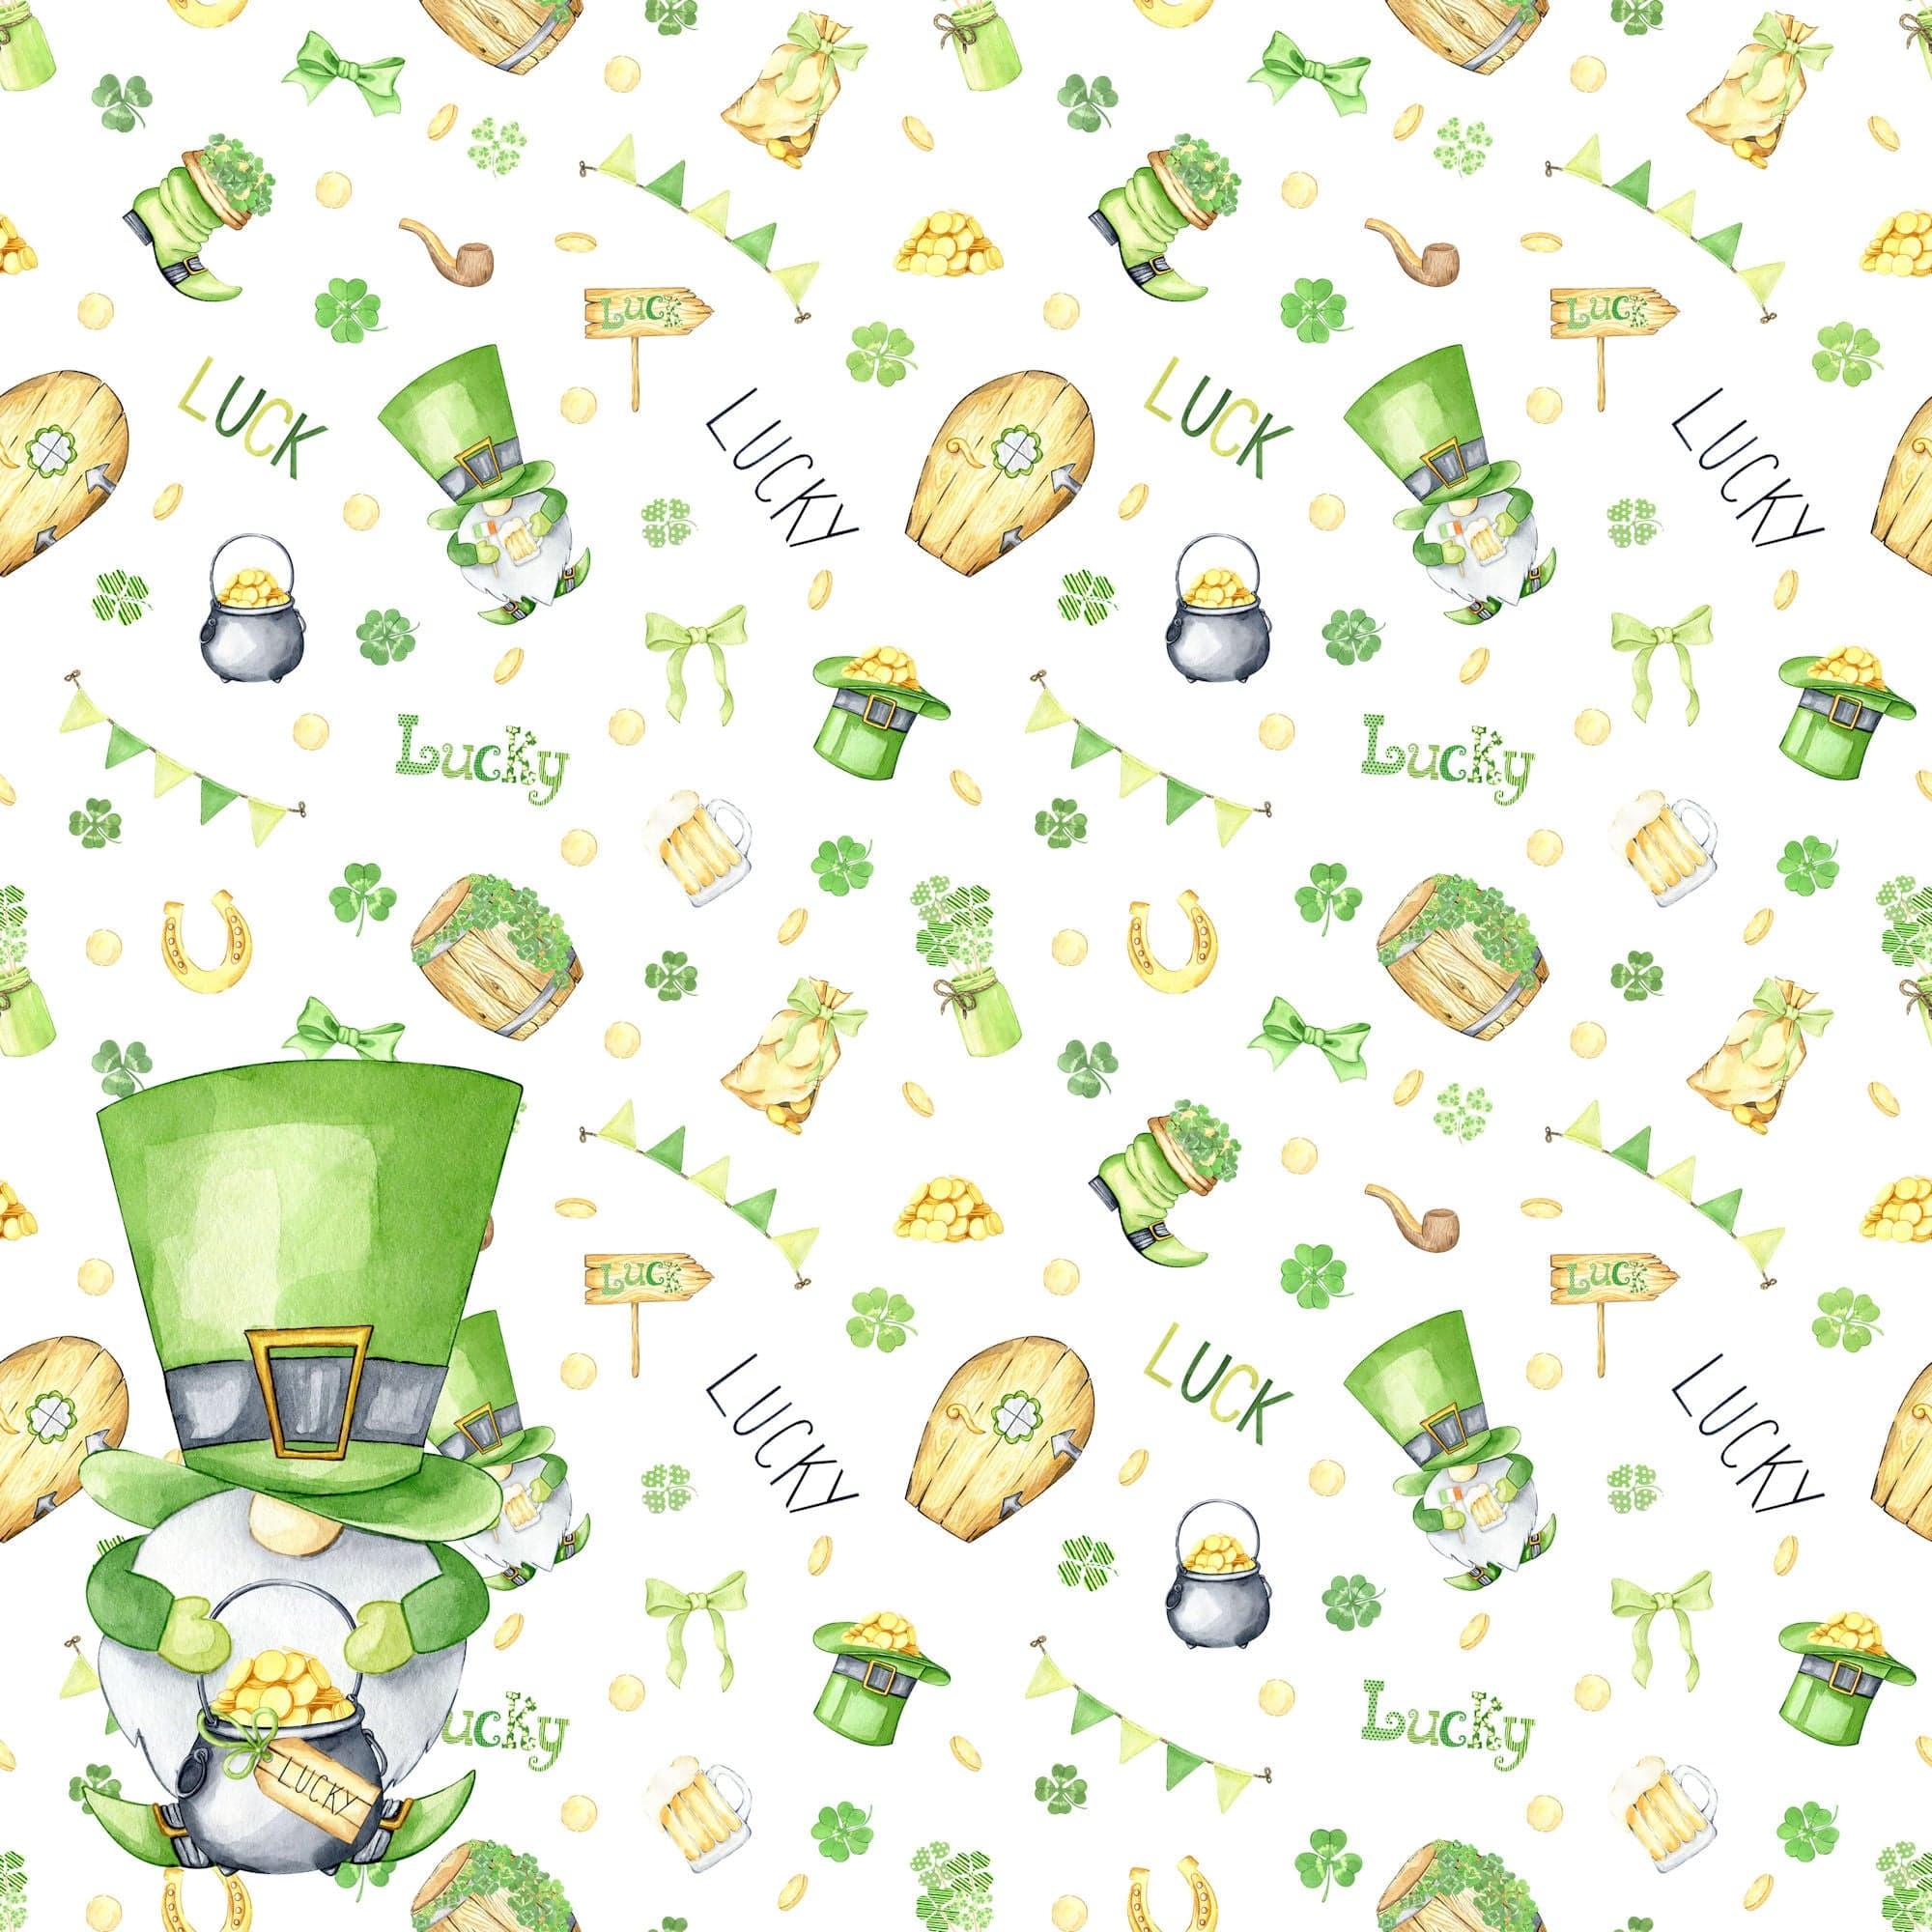 Lucky Leprechauns Collection Luck 12 x 12 Double-Sided Scrapbook Paper by SSC Designs - Scrapbook Supply Companies